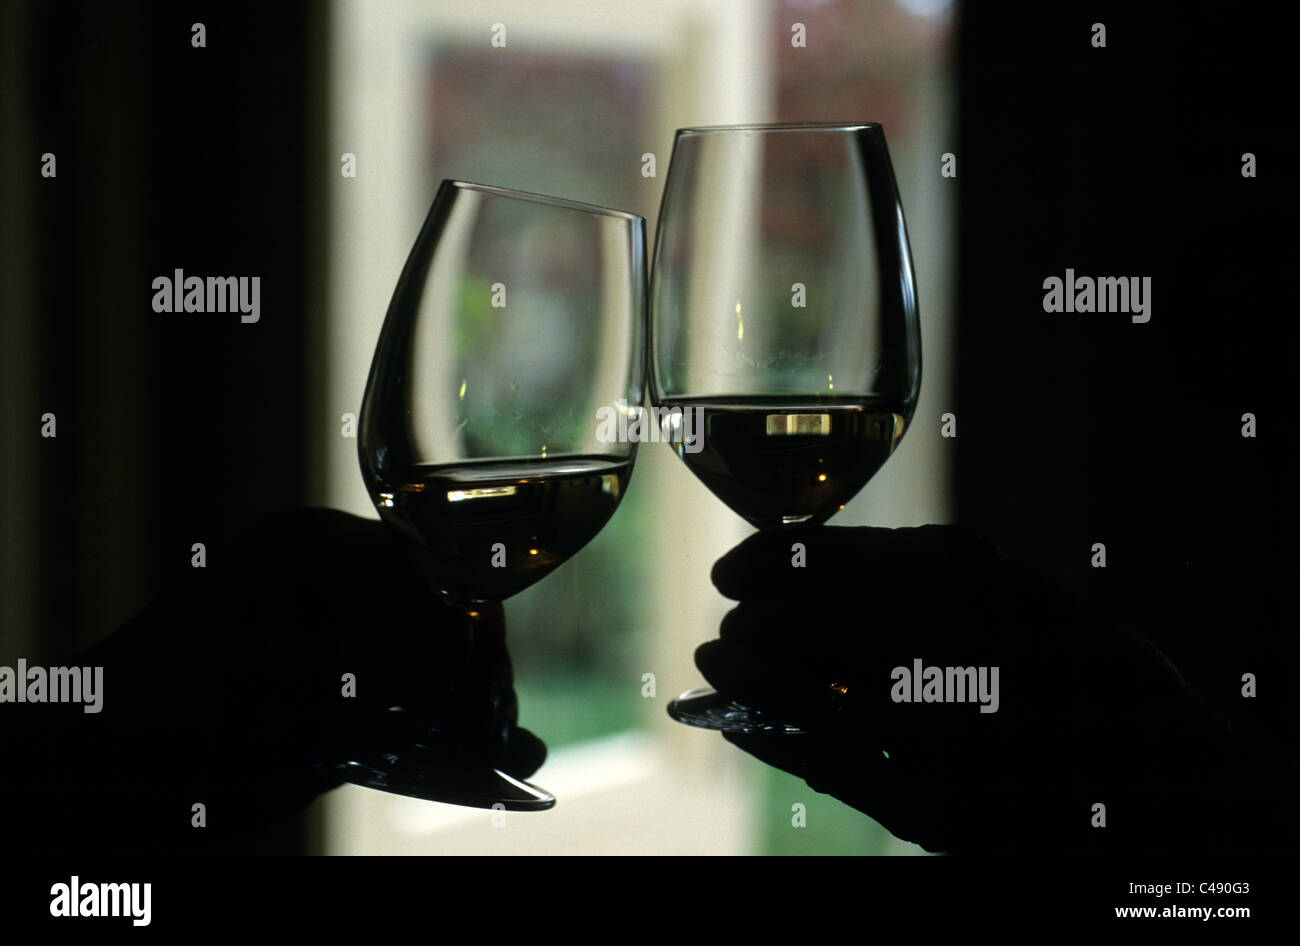 A toast with white wine glasses Stock Photo